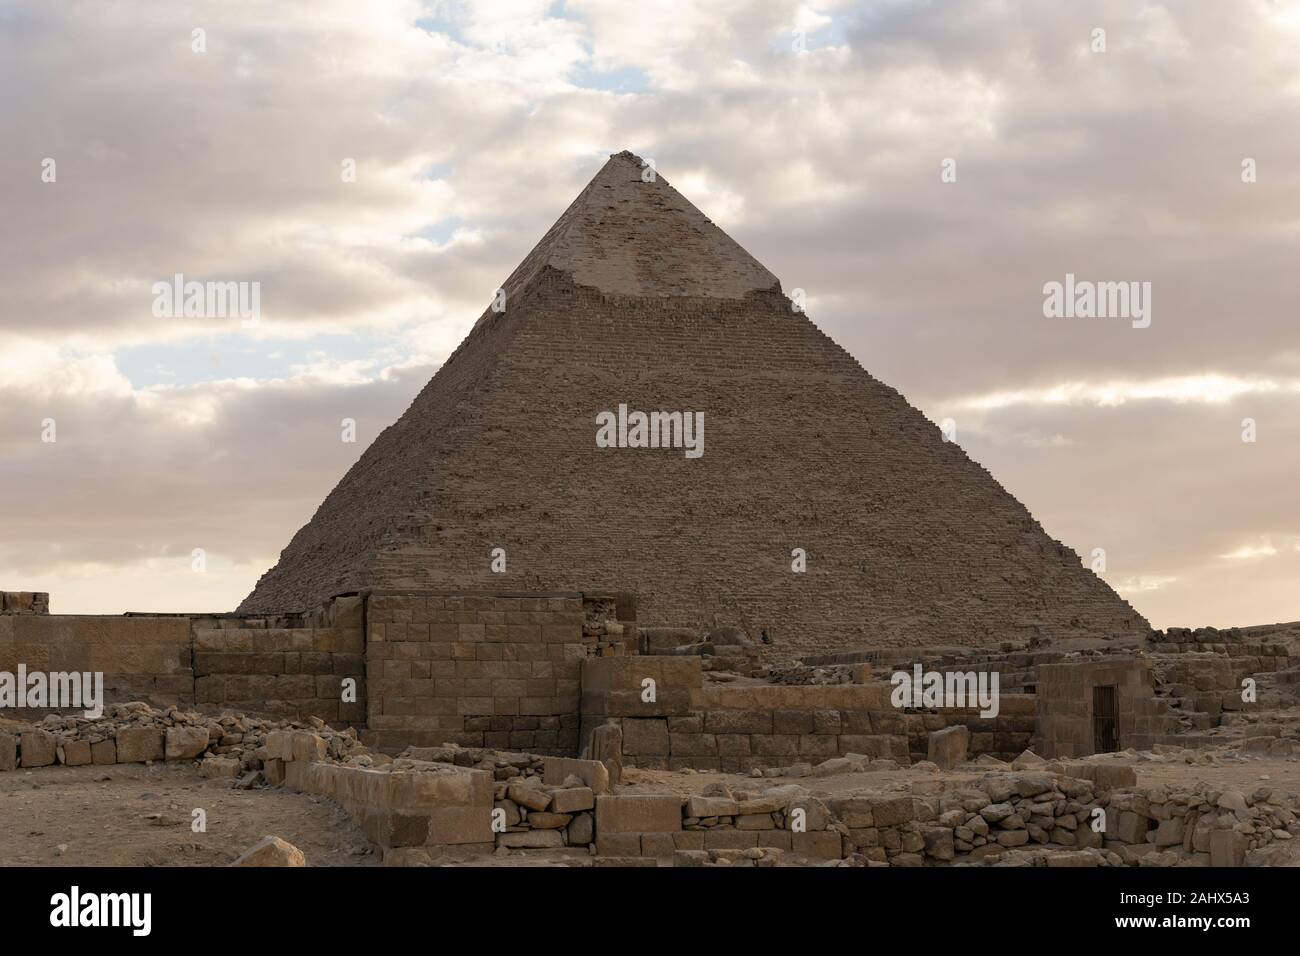 Evening sky behind the Pyramid of Khafre in Giza Stock Photo